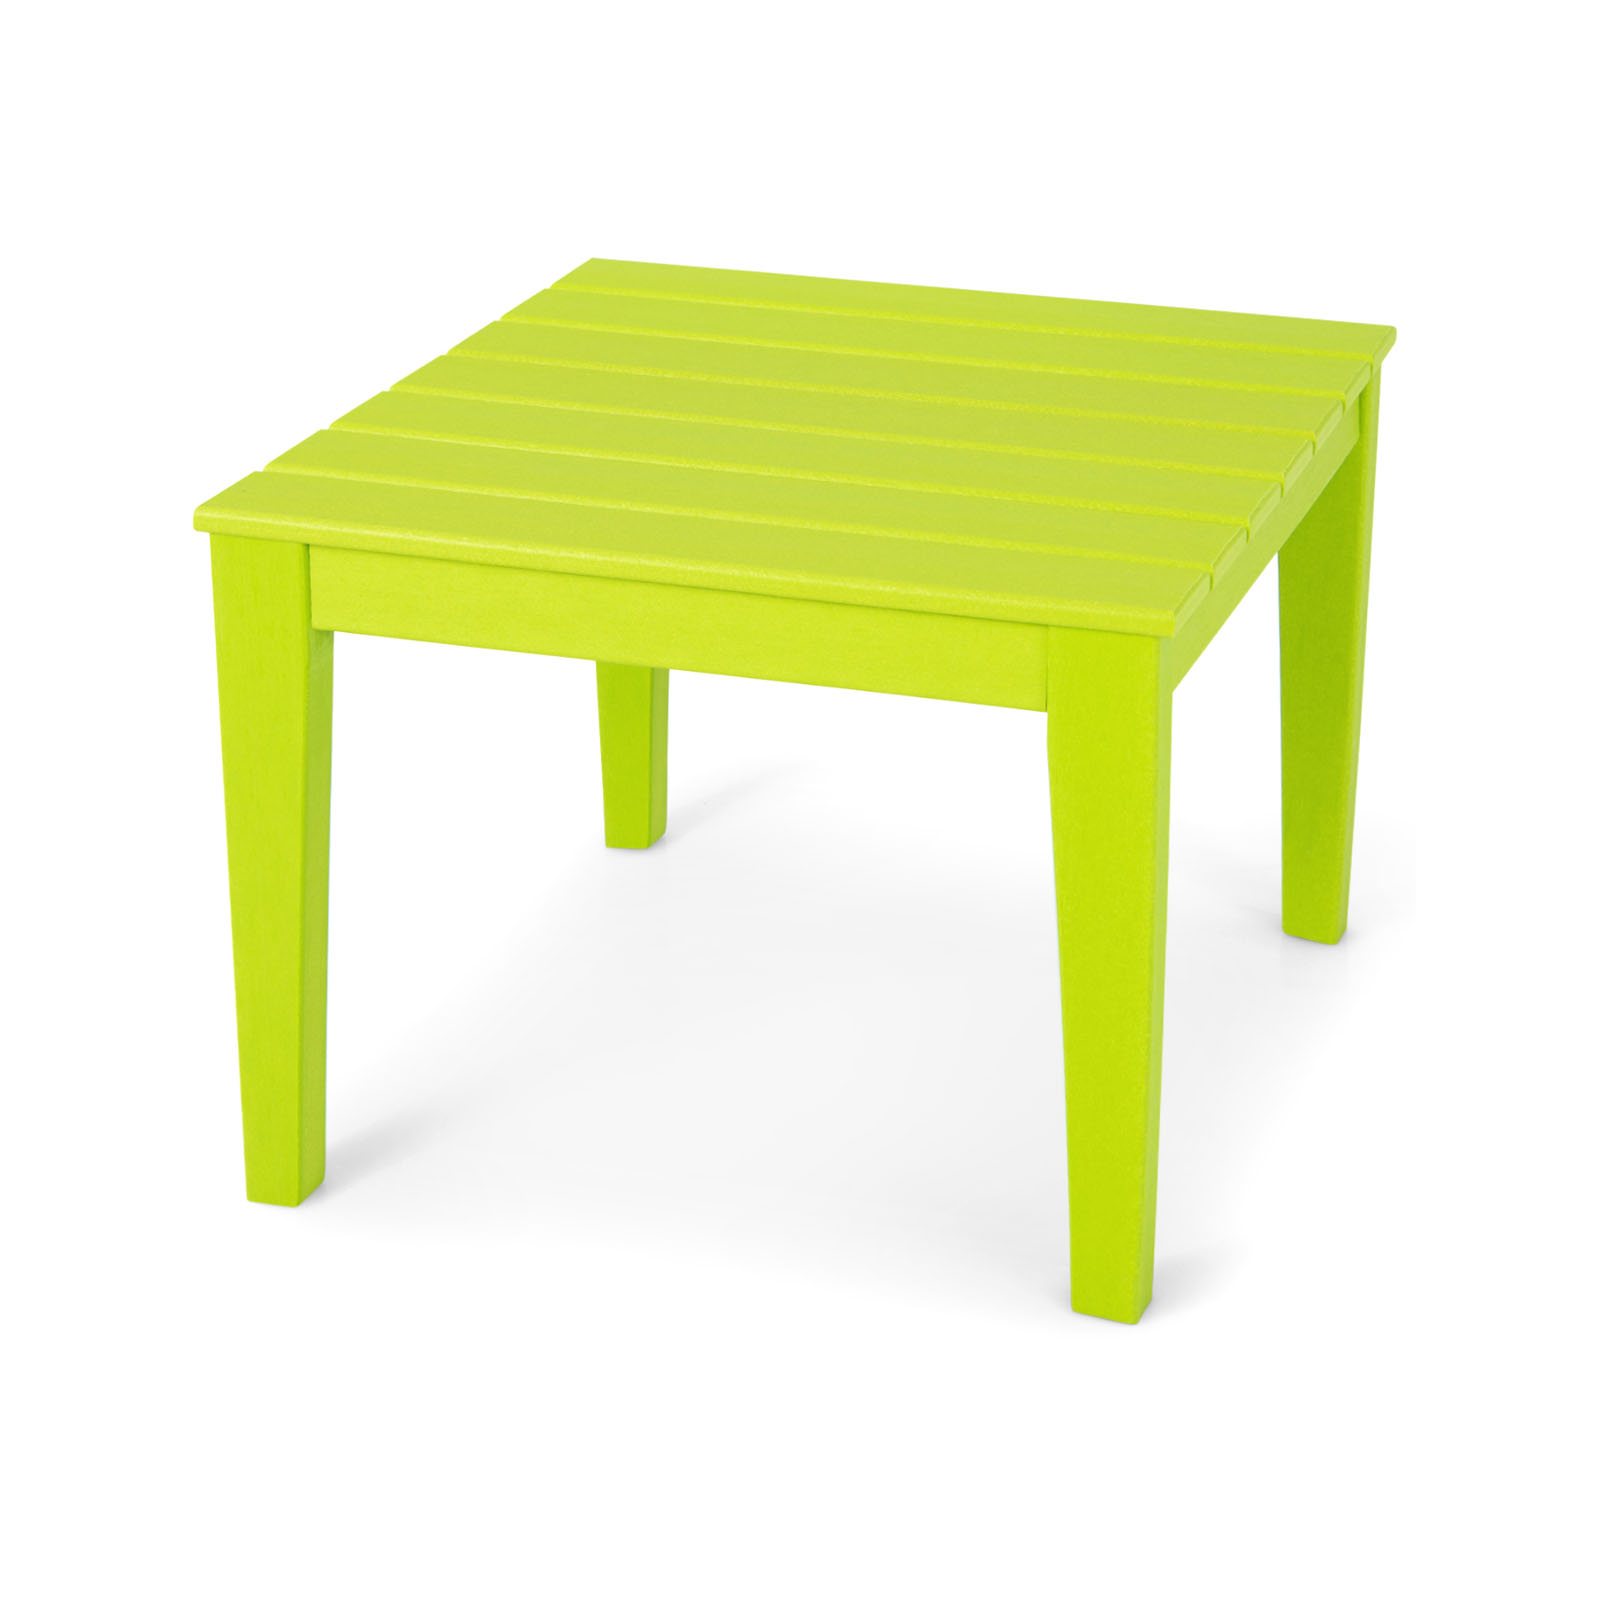 64.5 x 64.5 cm HDPE Square Kids Table for Reading Drawing Dining-Green